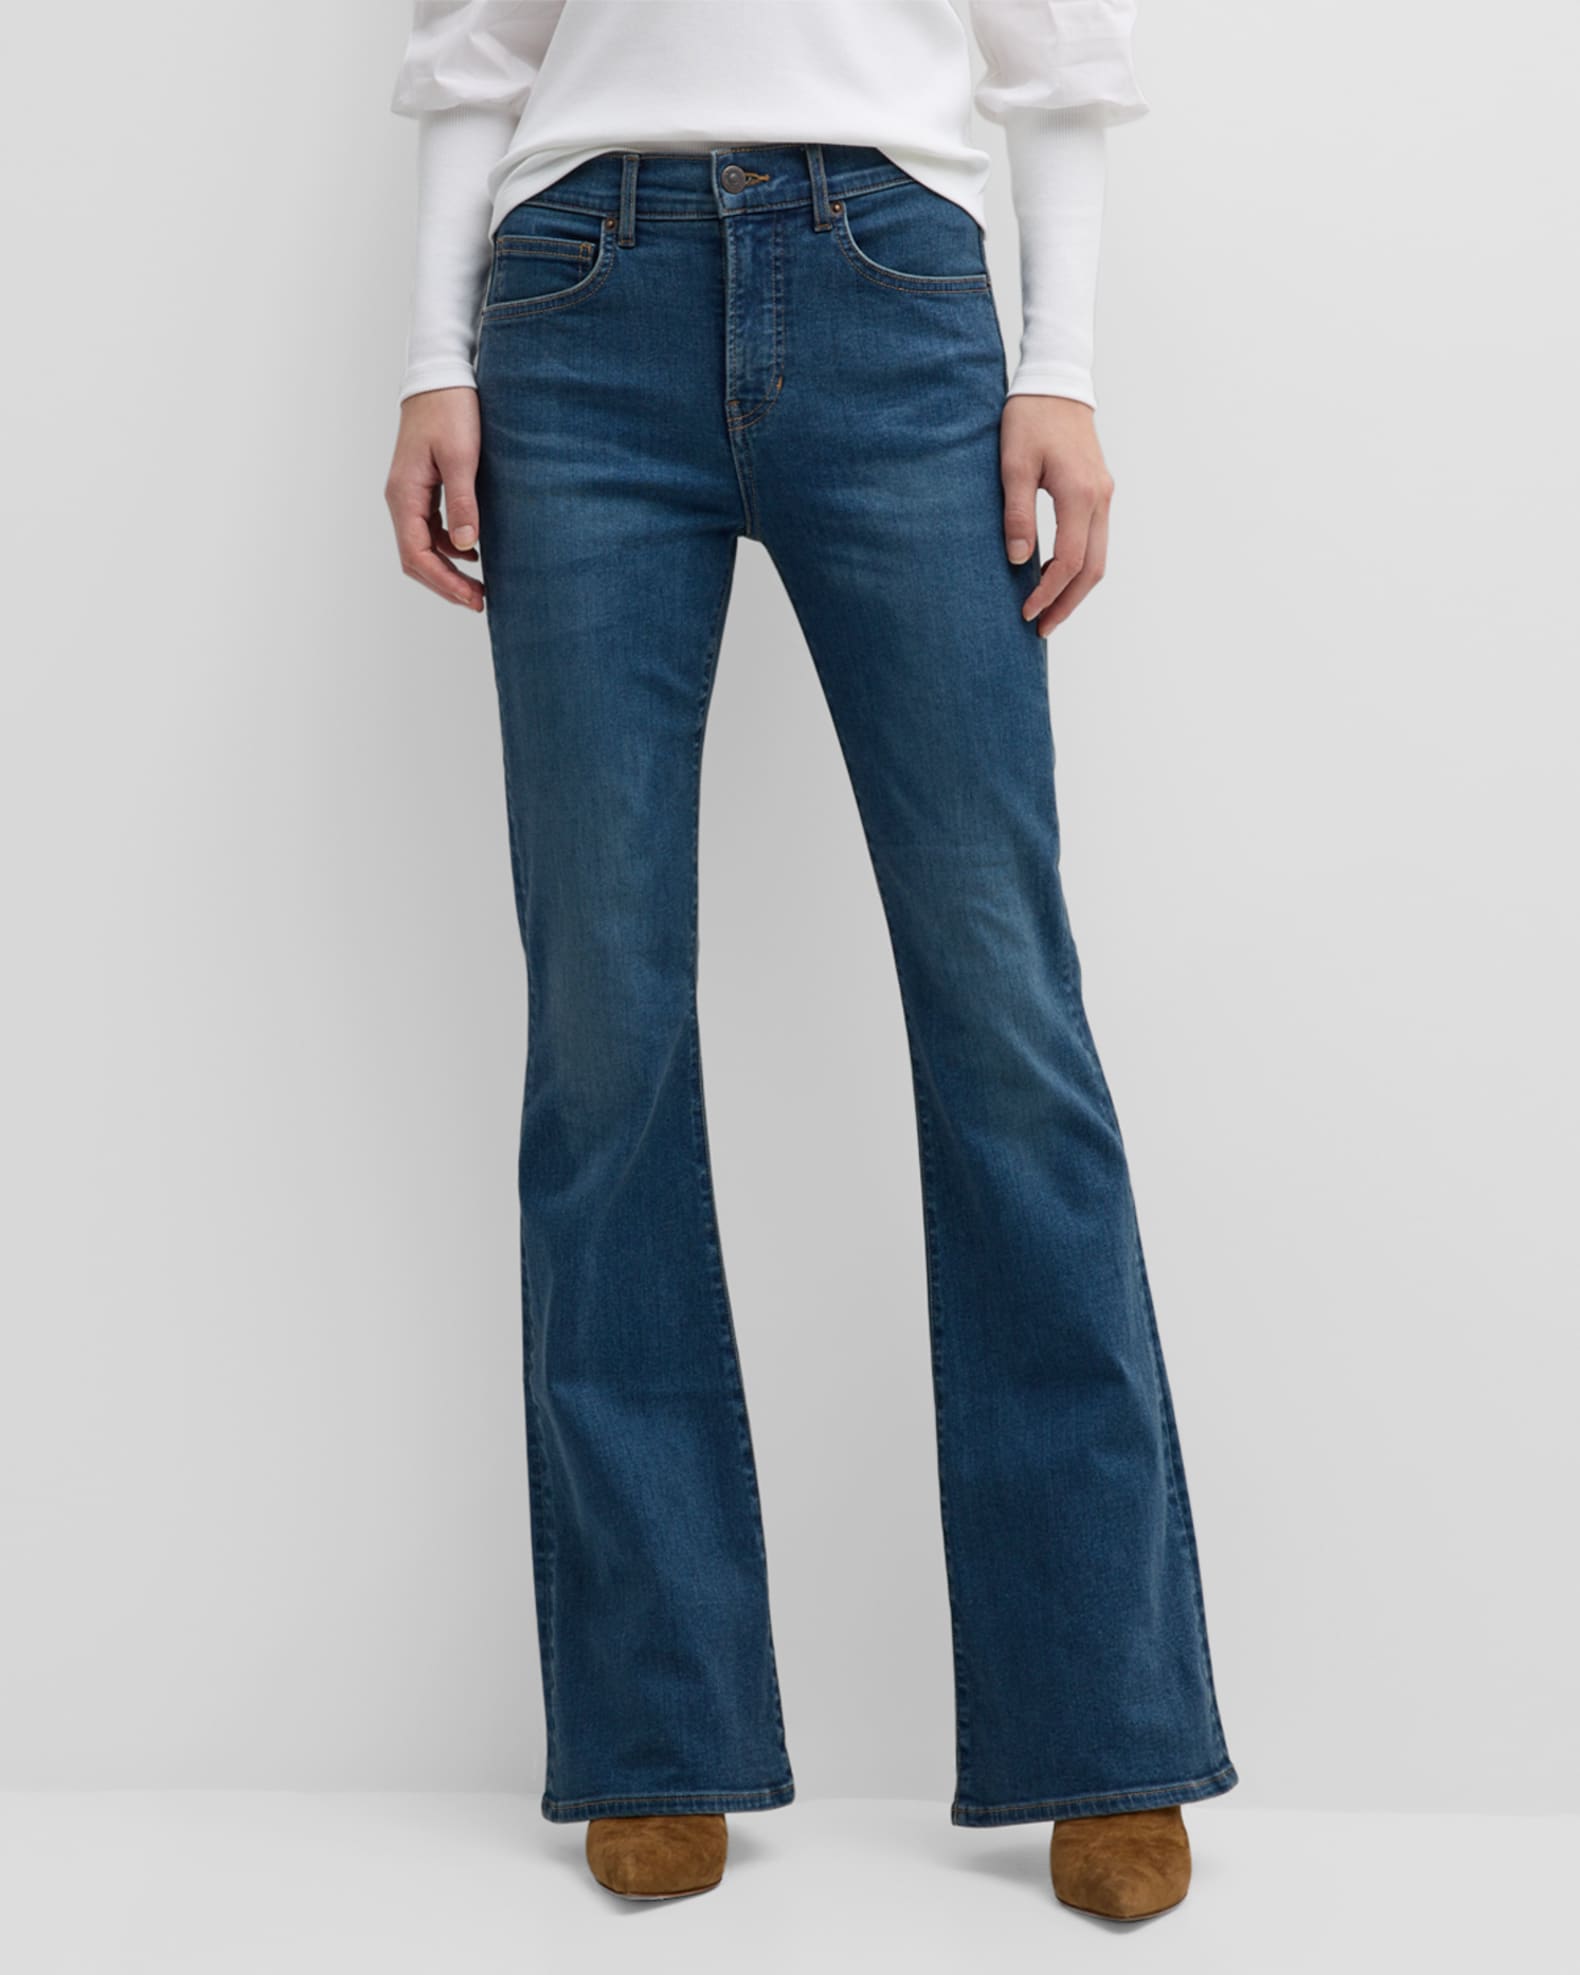 Veronica Beard Jeans Beverly High Rise Skinny Flare Jeans | Neiman Marcus